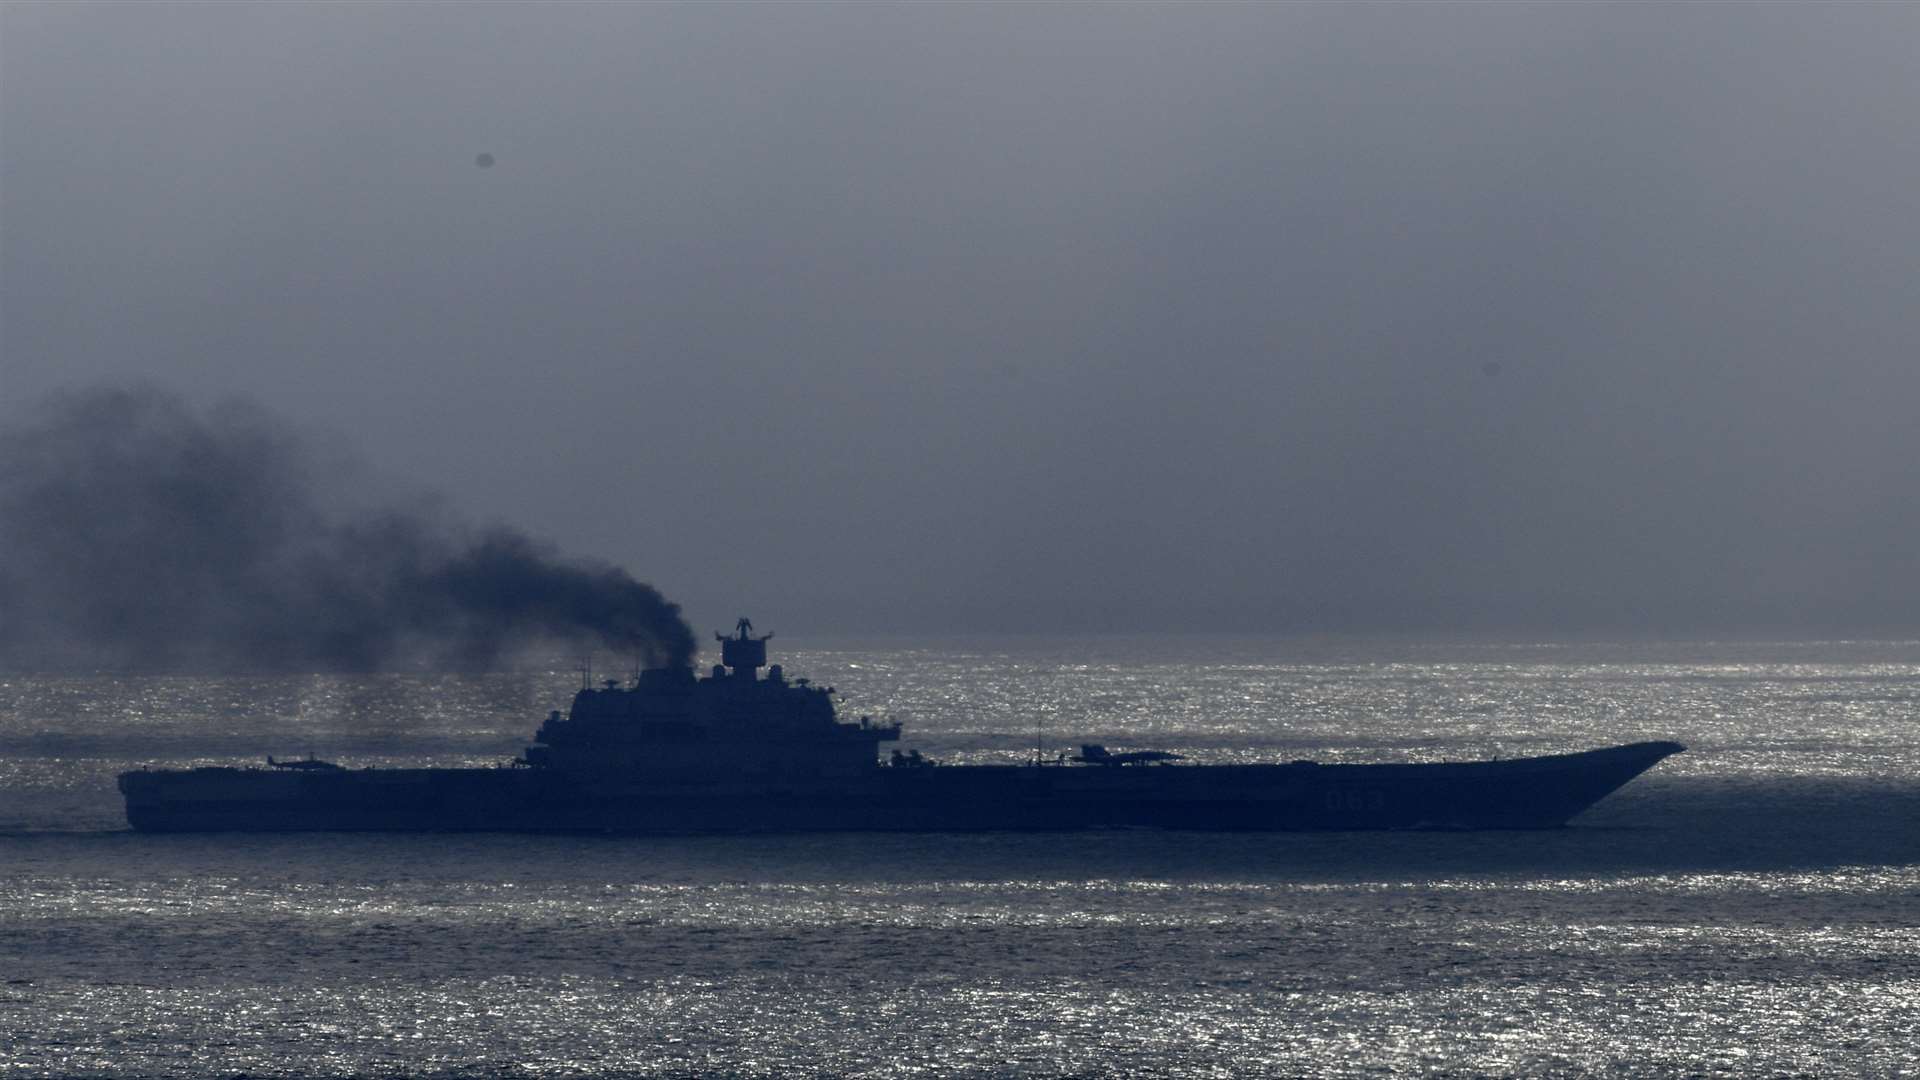 Russian aircraft carrier Admiral Kuznetsoc passes through the English Channel. Picture: Barry Goodwin.